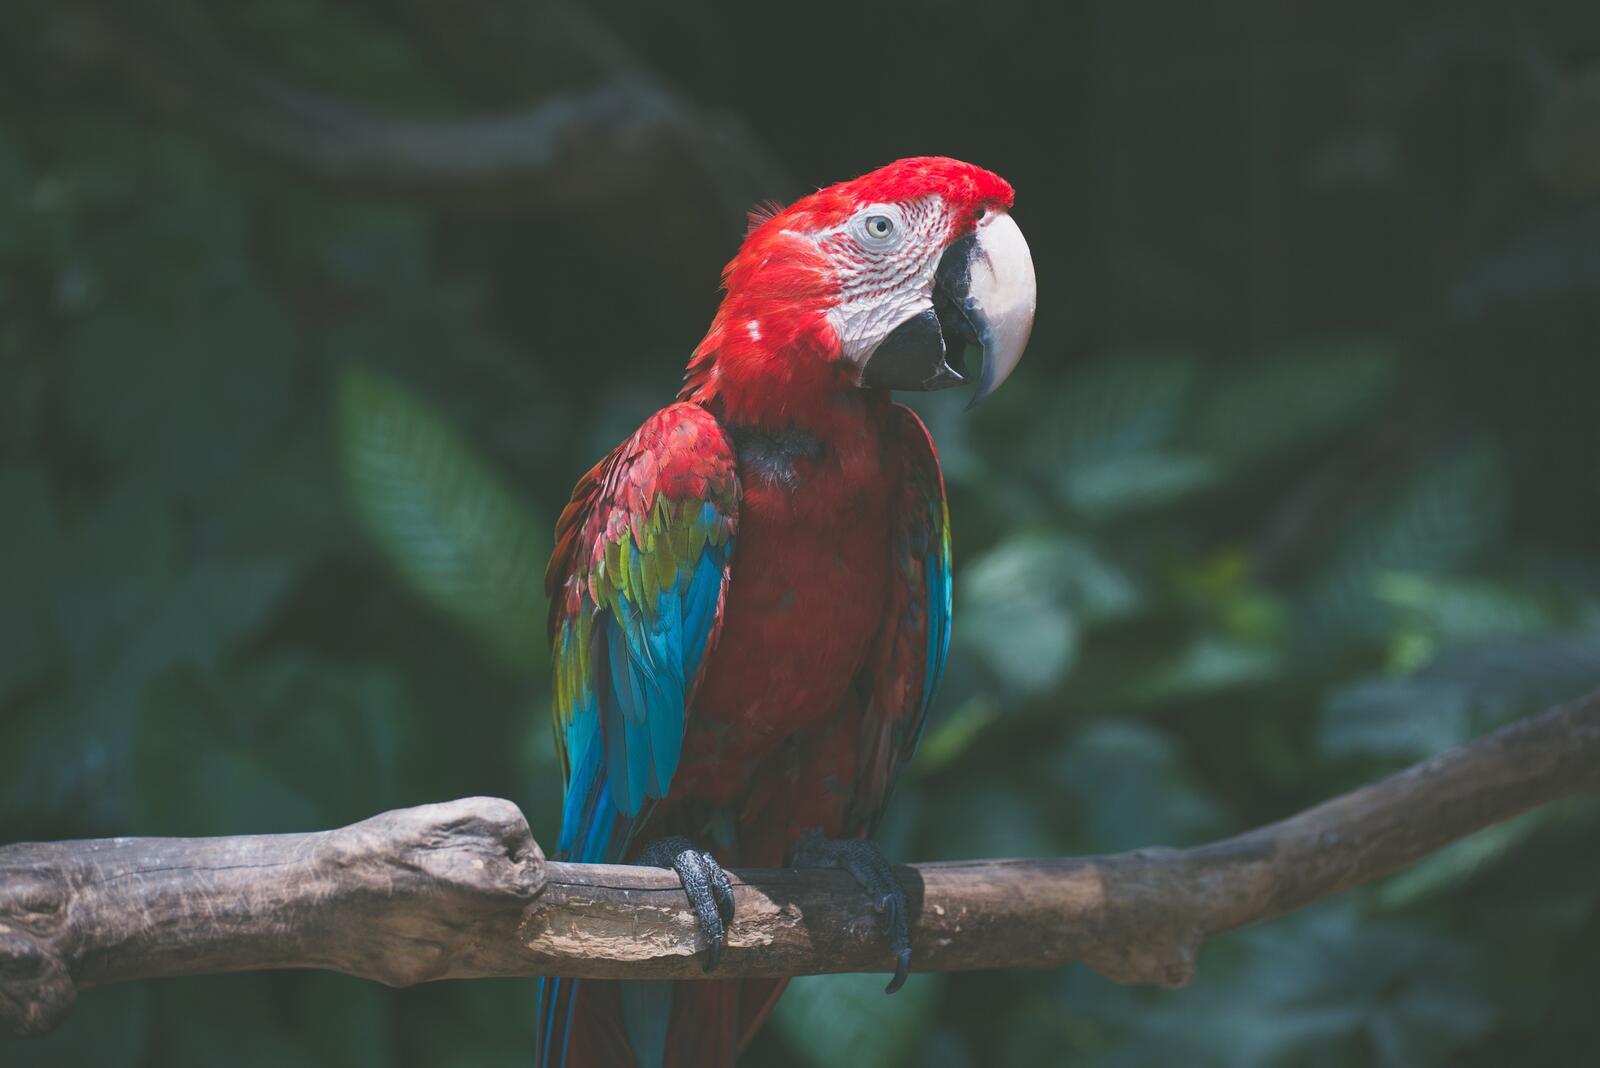 Parrot with red feathers